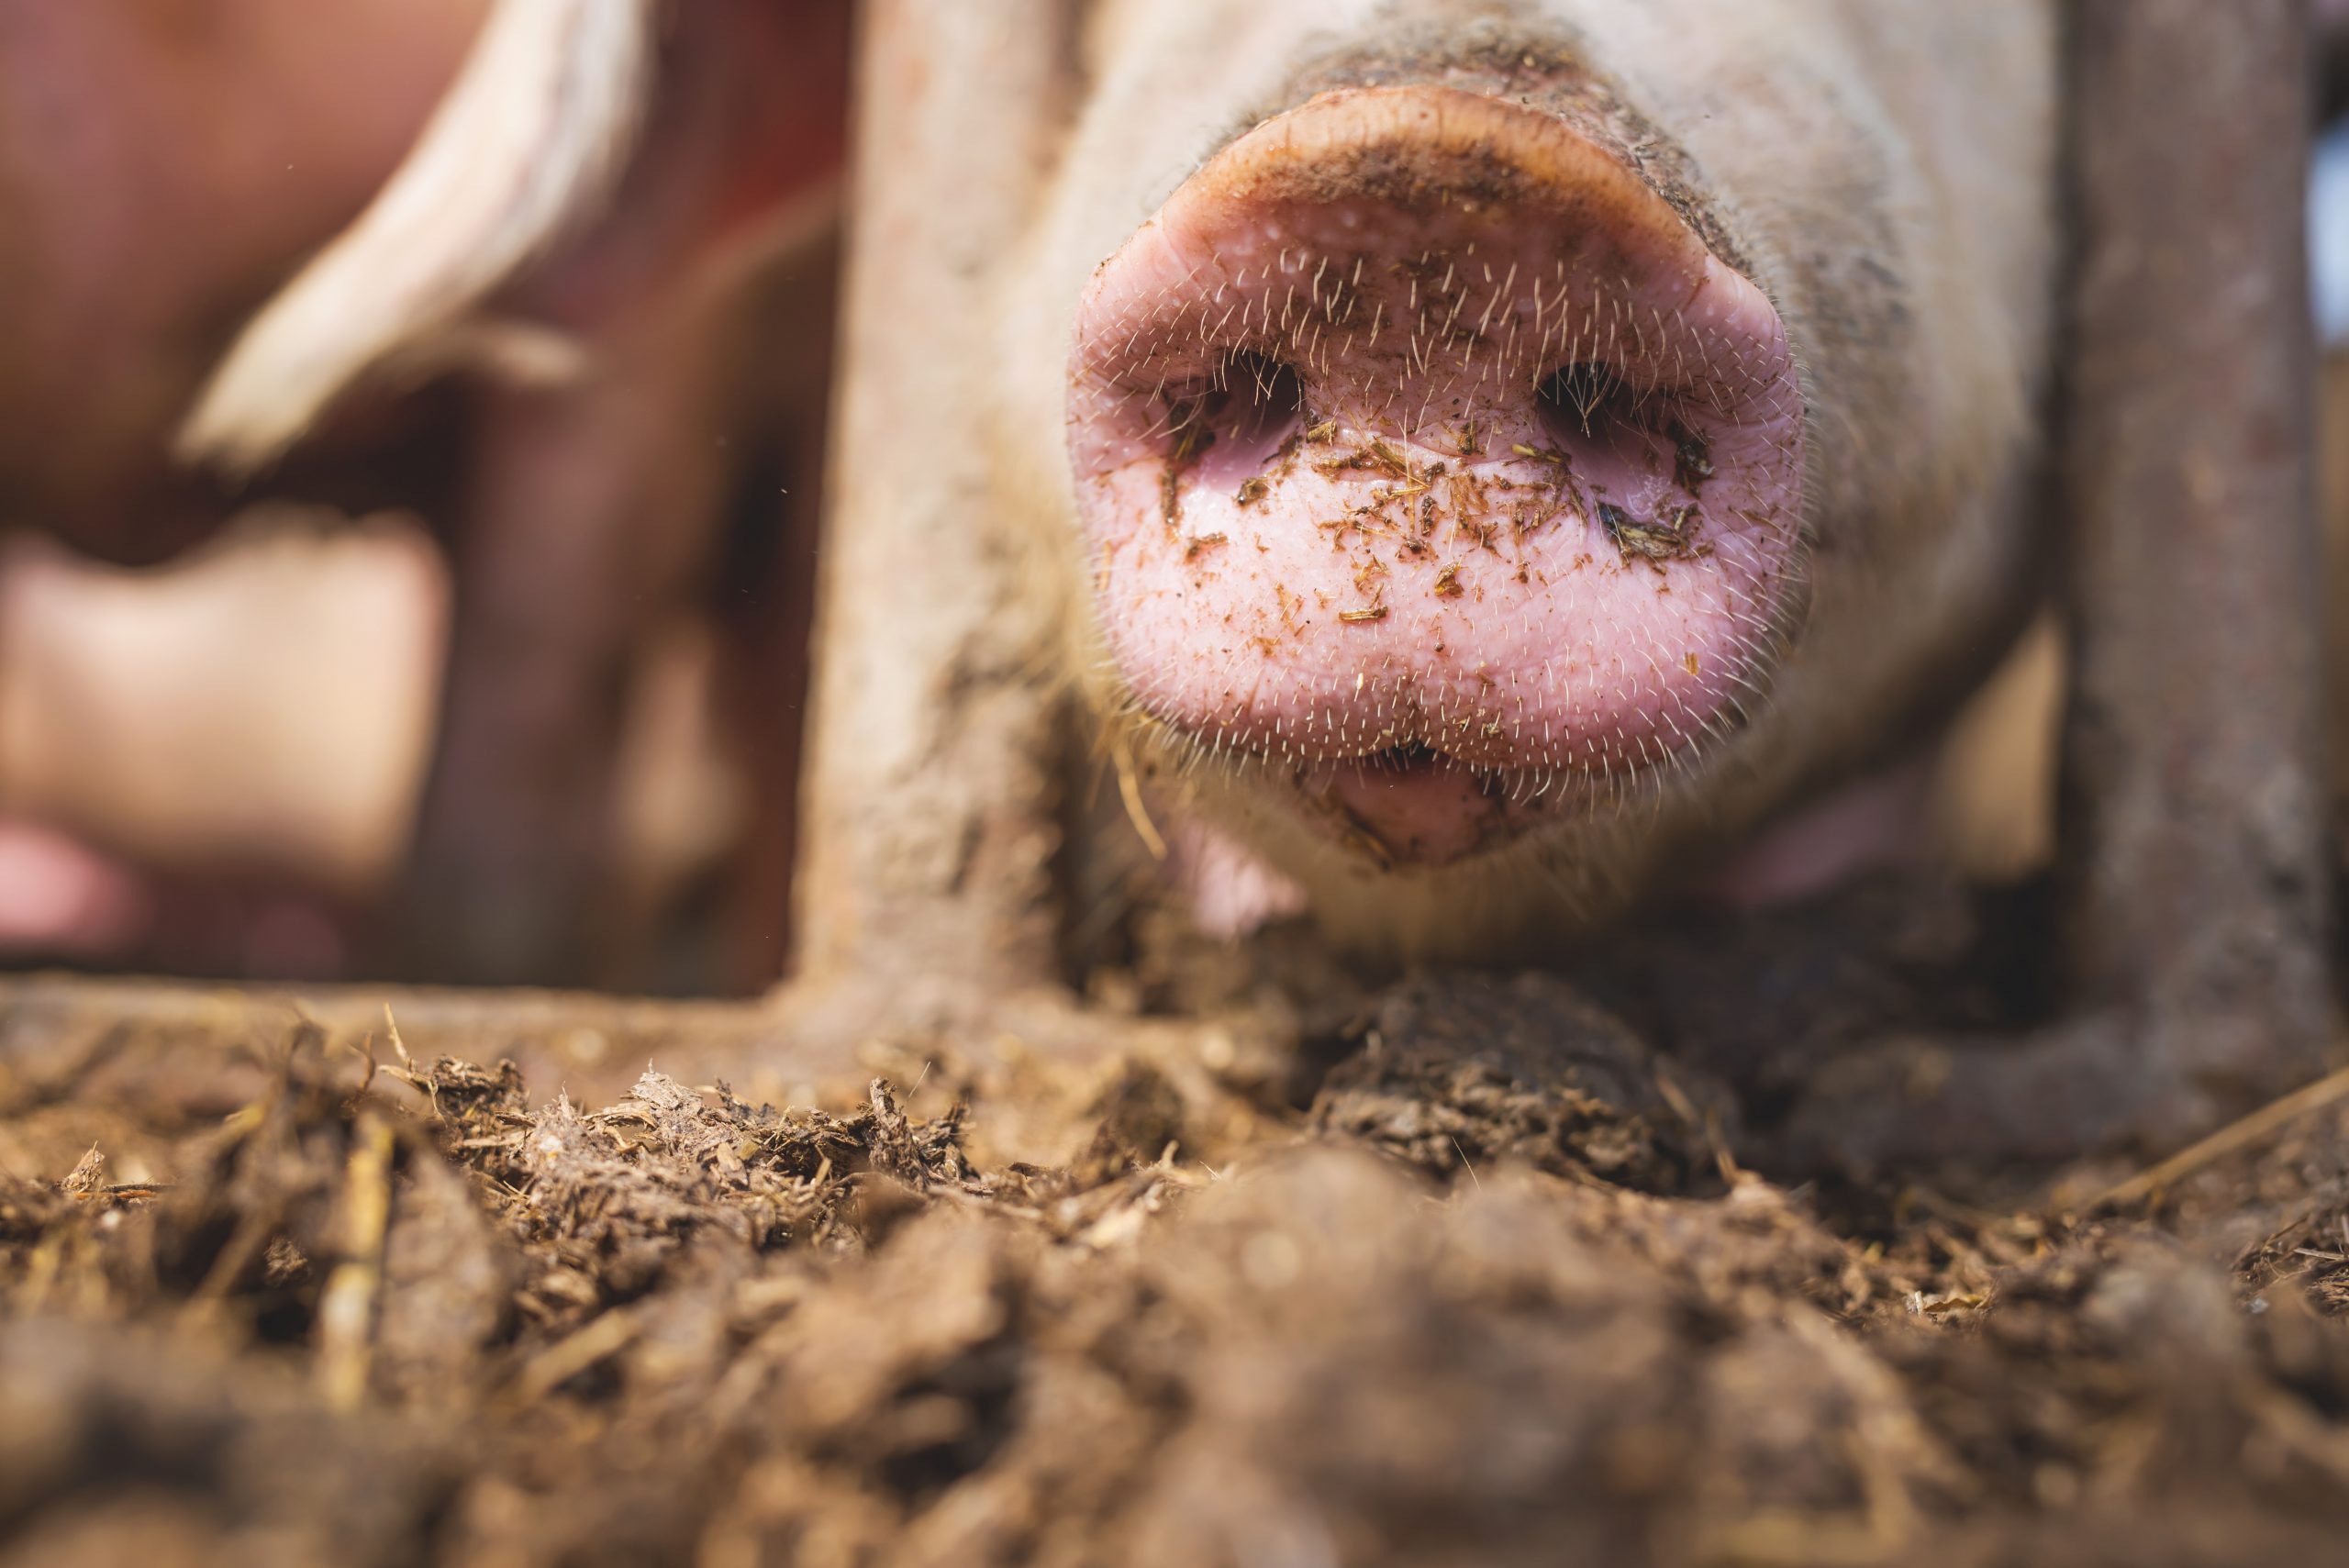 Modern sows: Tailor made nutrition needed. Photo: Shutterstock